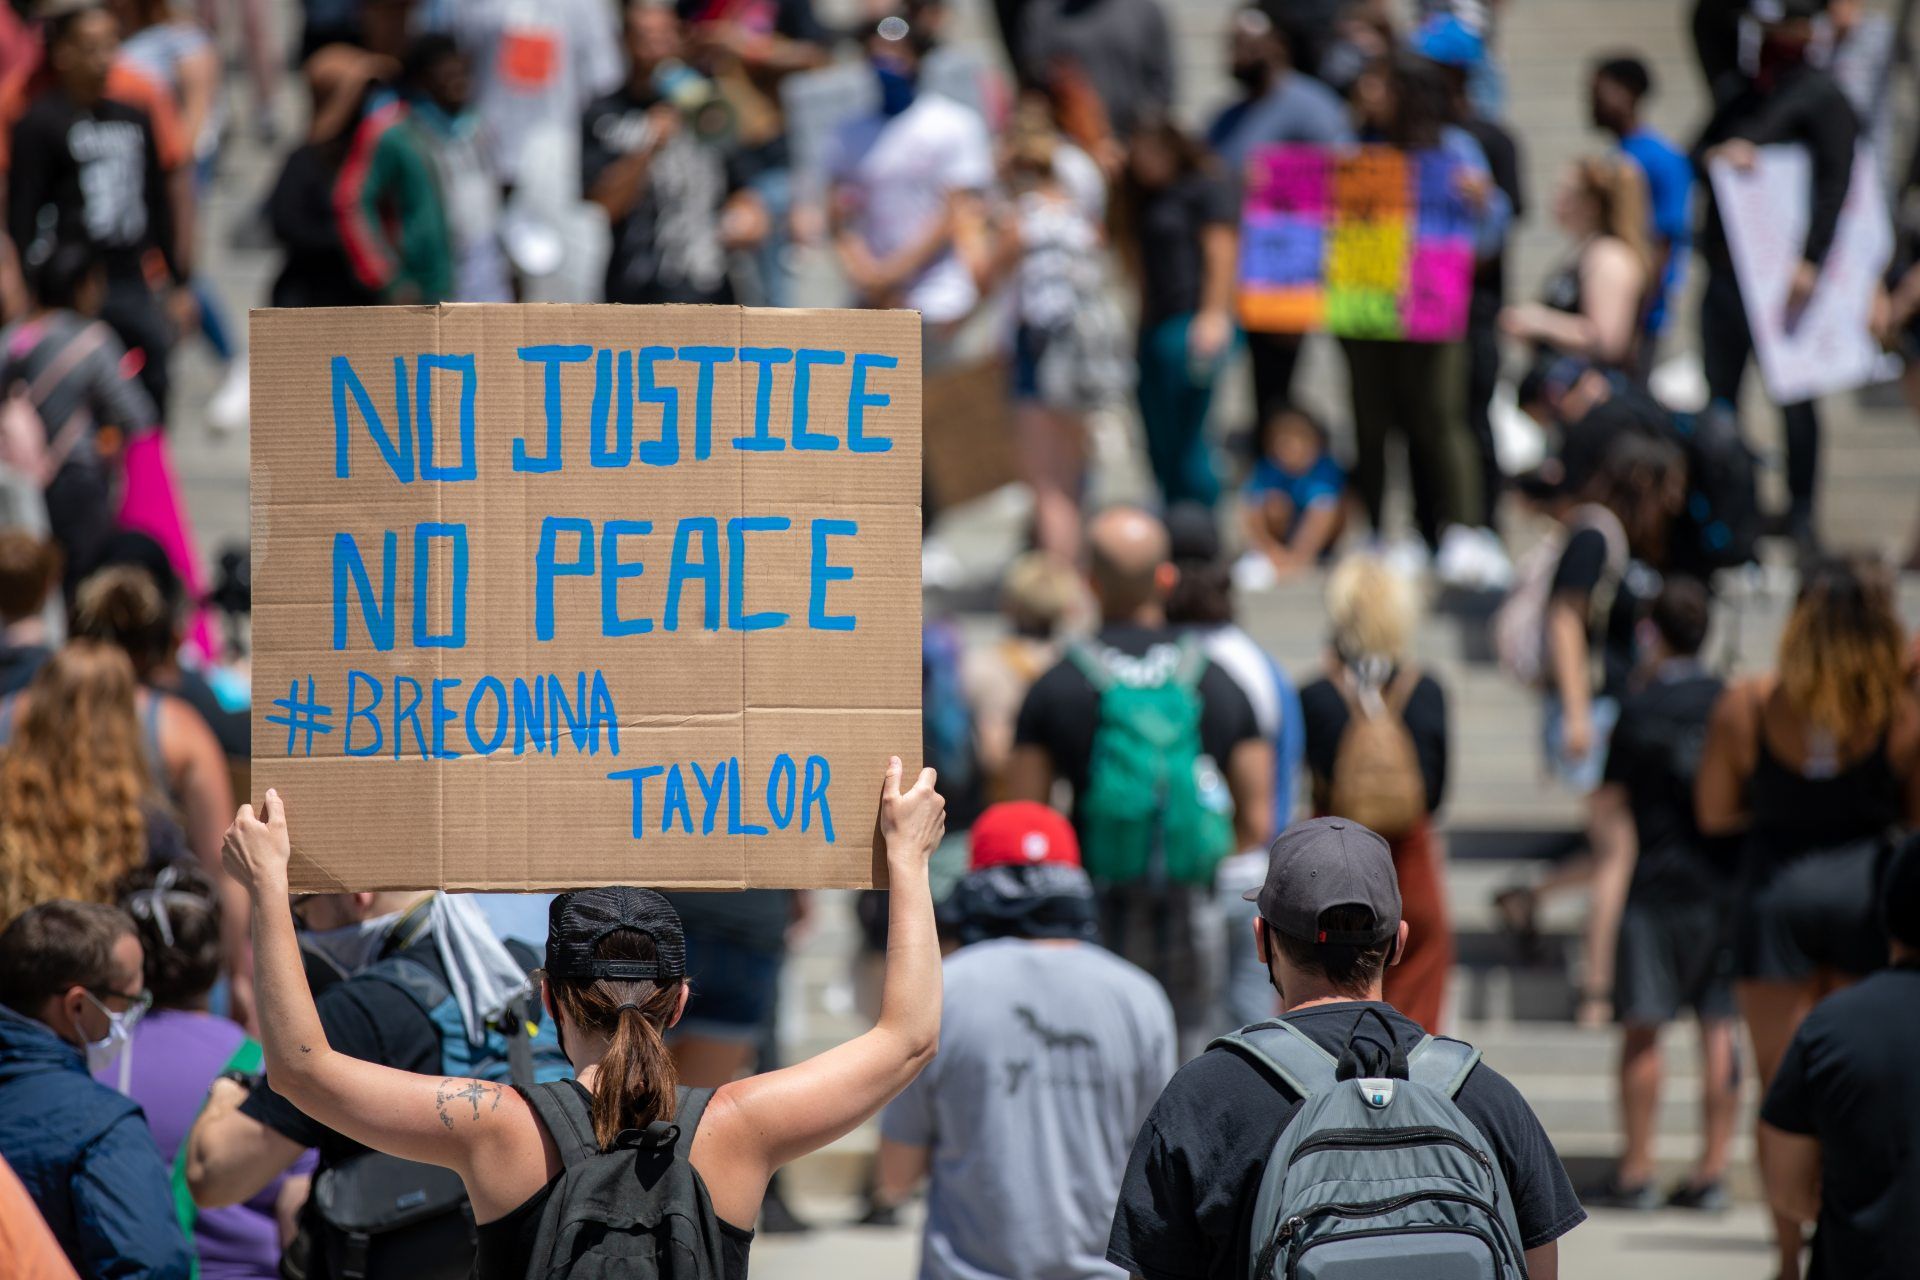 A protester holds a sign that reads "No Justice No Peace #Breonna Taylor" - wrongful death